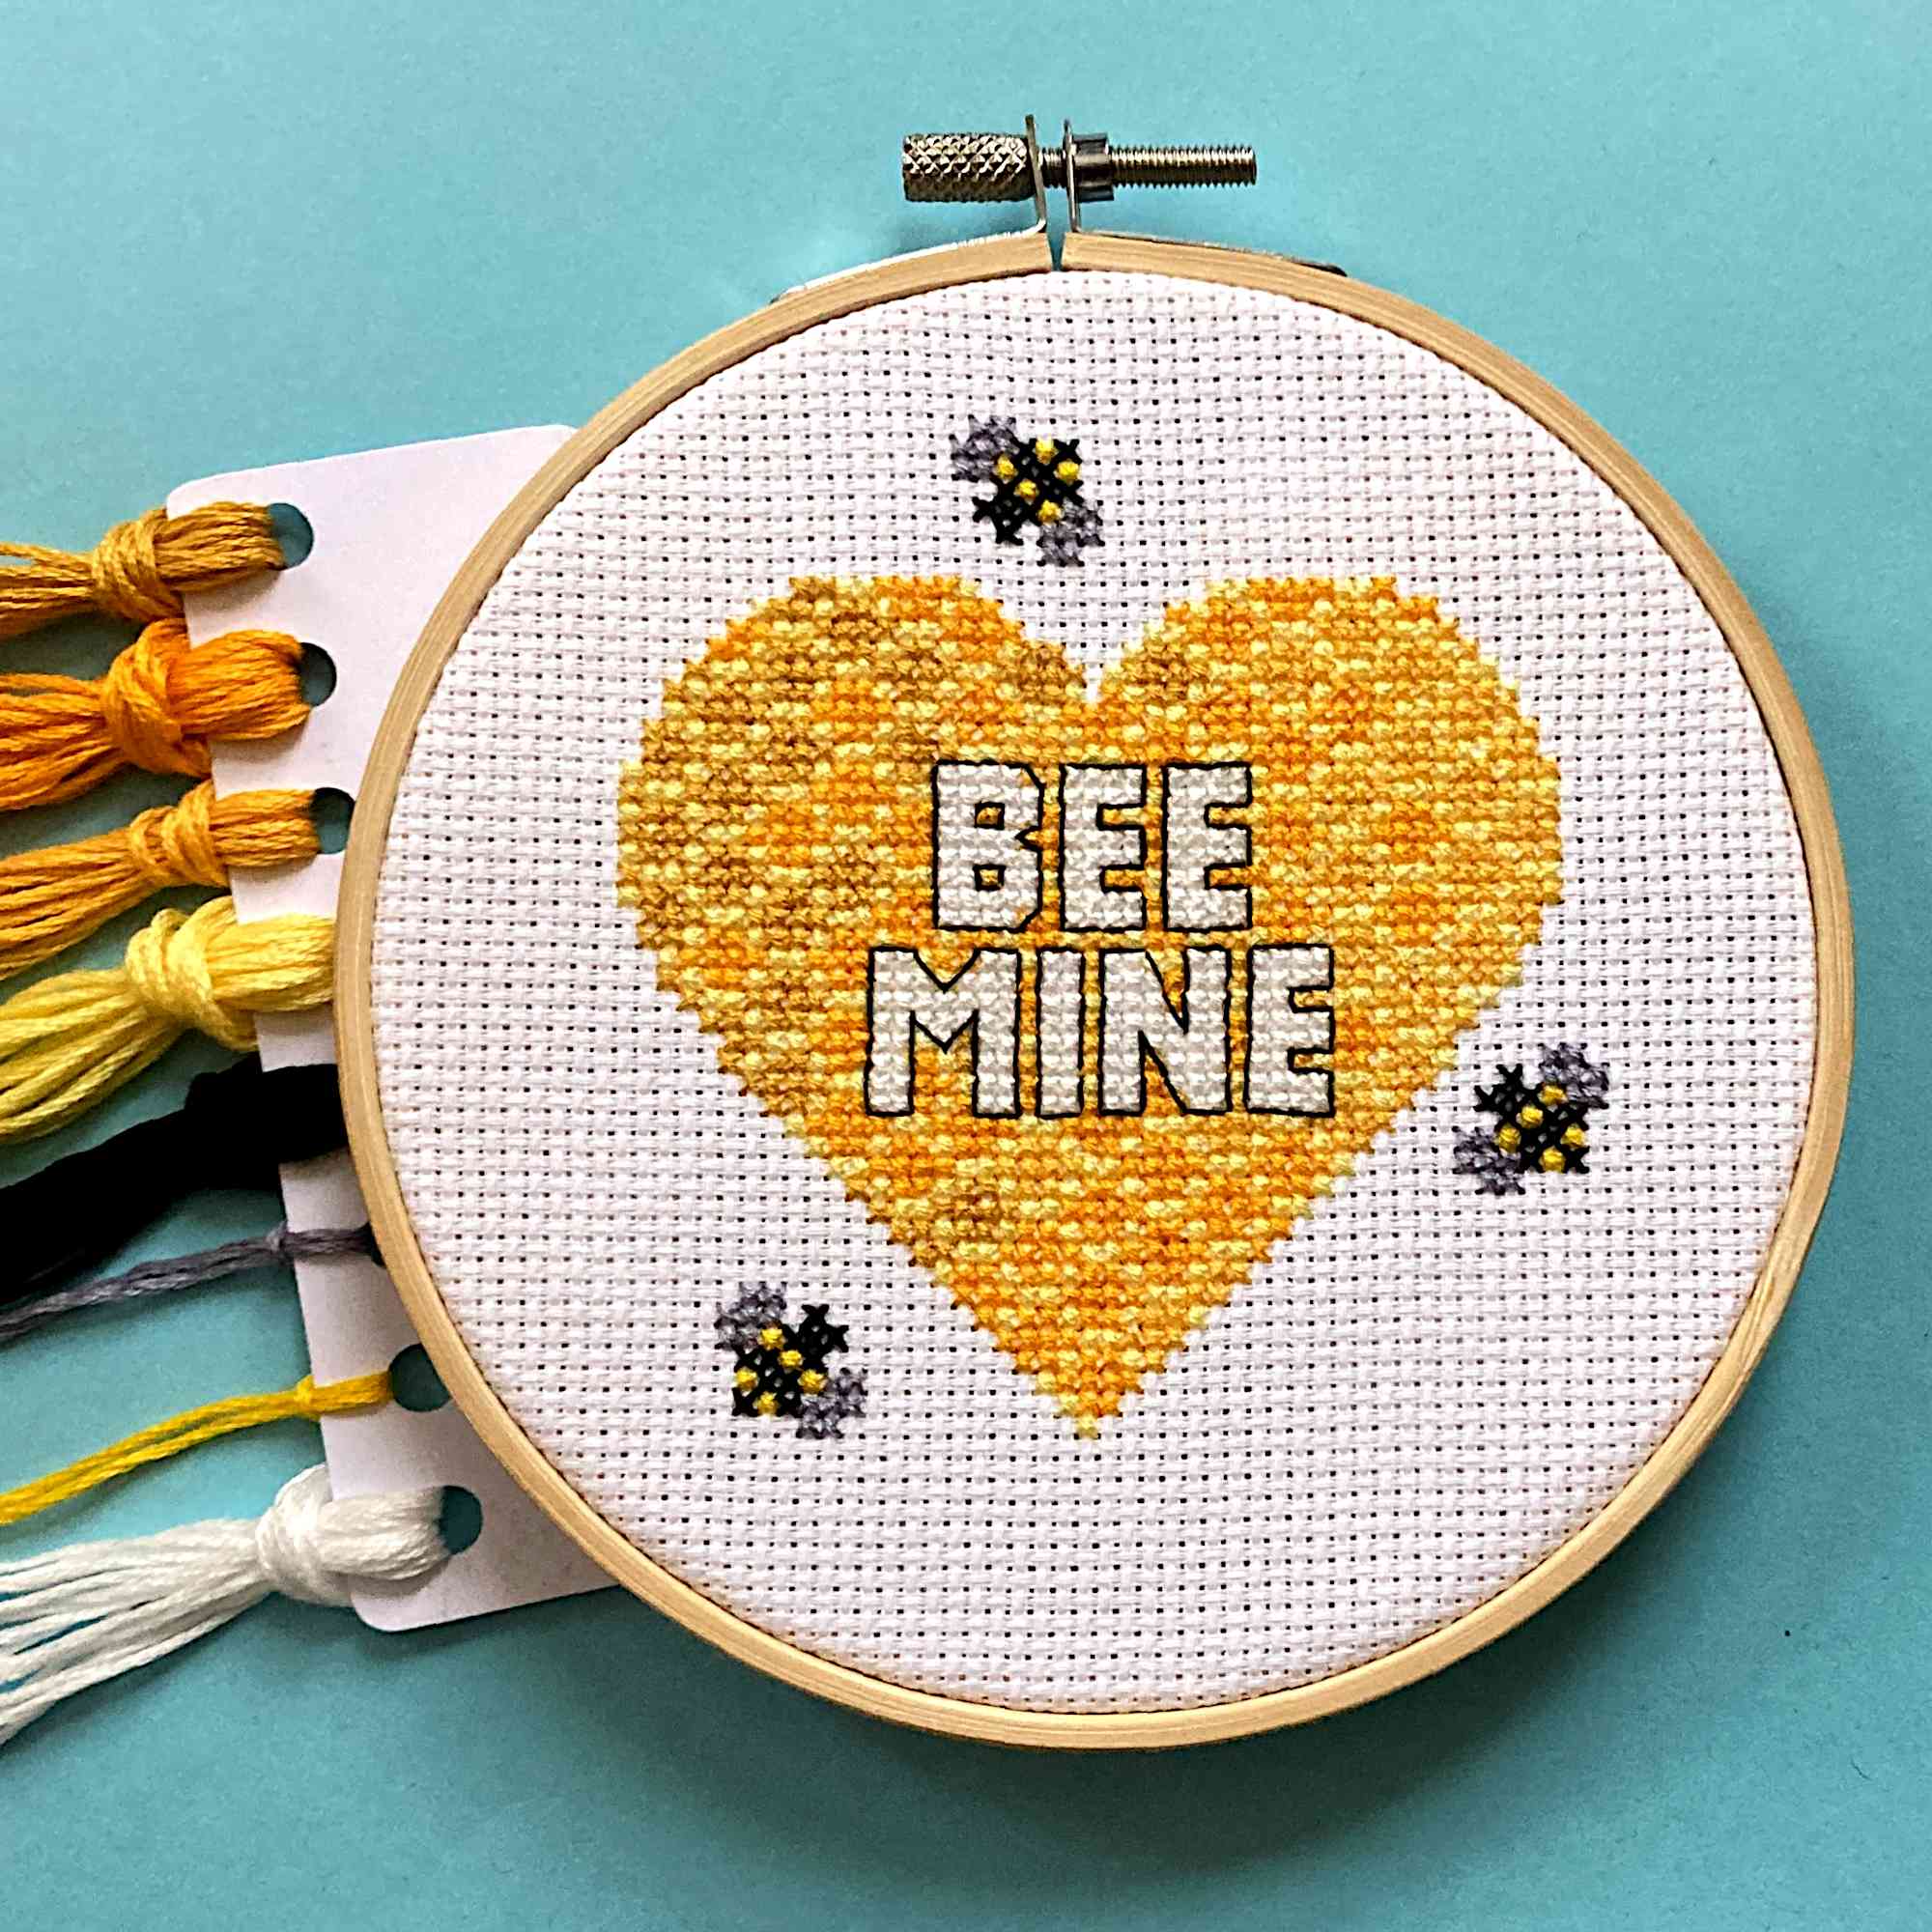 Honeycomb Heart Cross Stitch with Bees and 'BEE MINE' pun